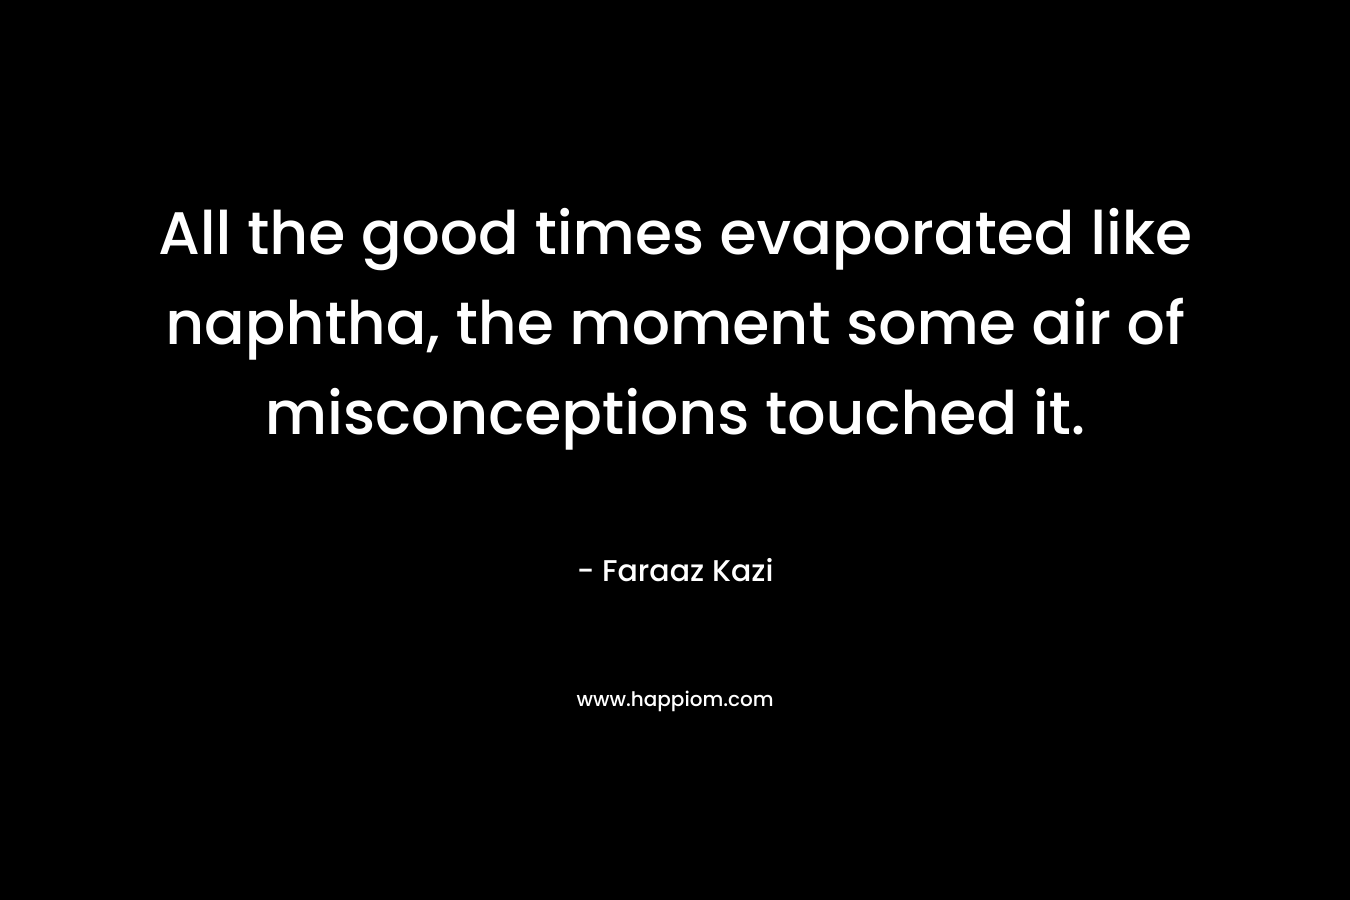 All the good times evaporated like naphtha, the moment some air of misconceptions touched it.